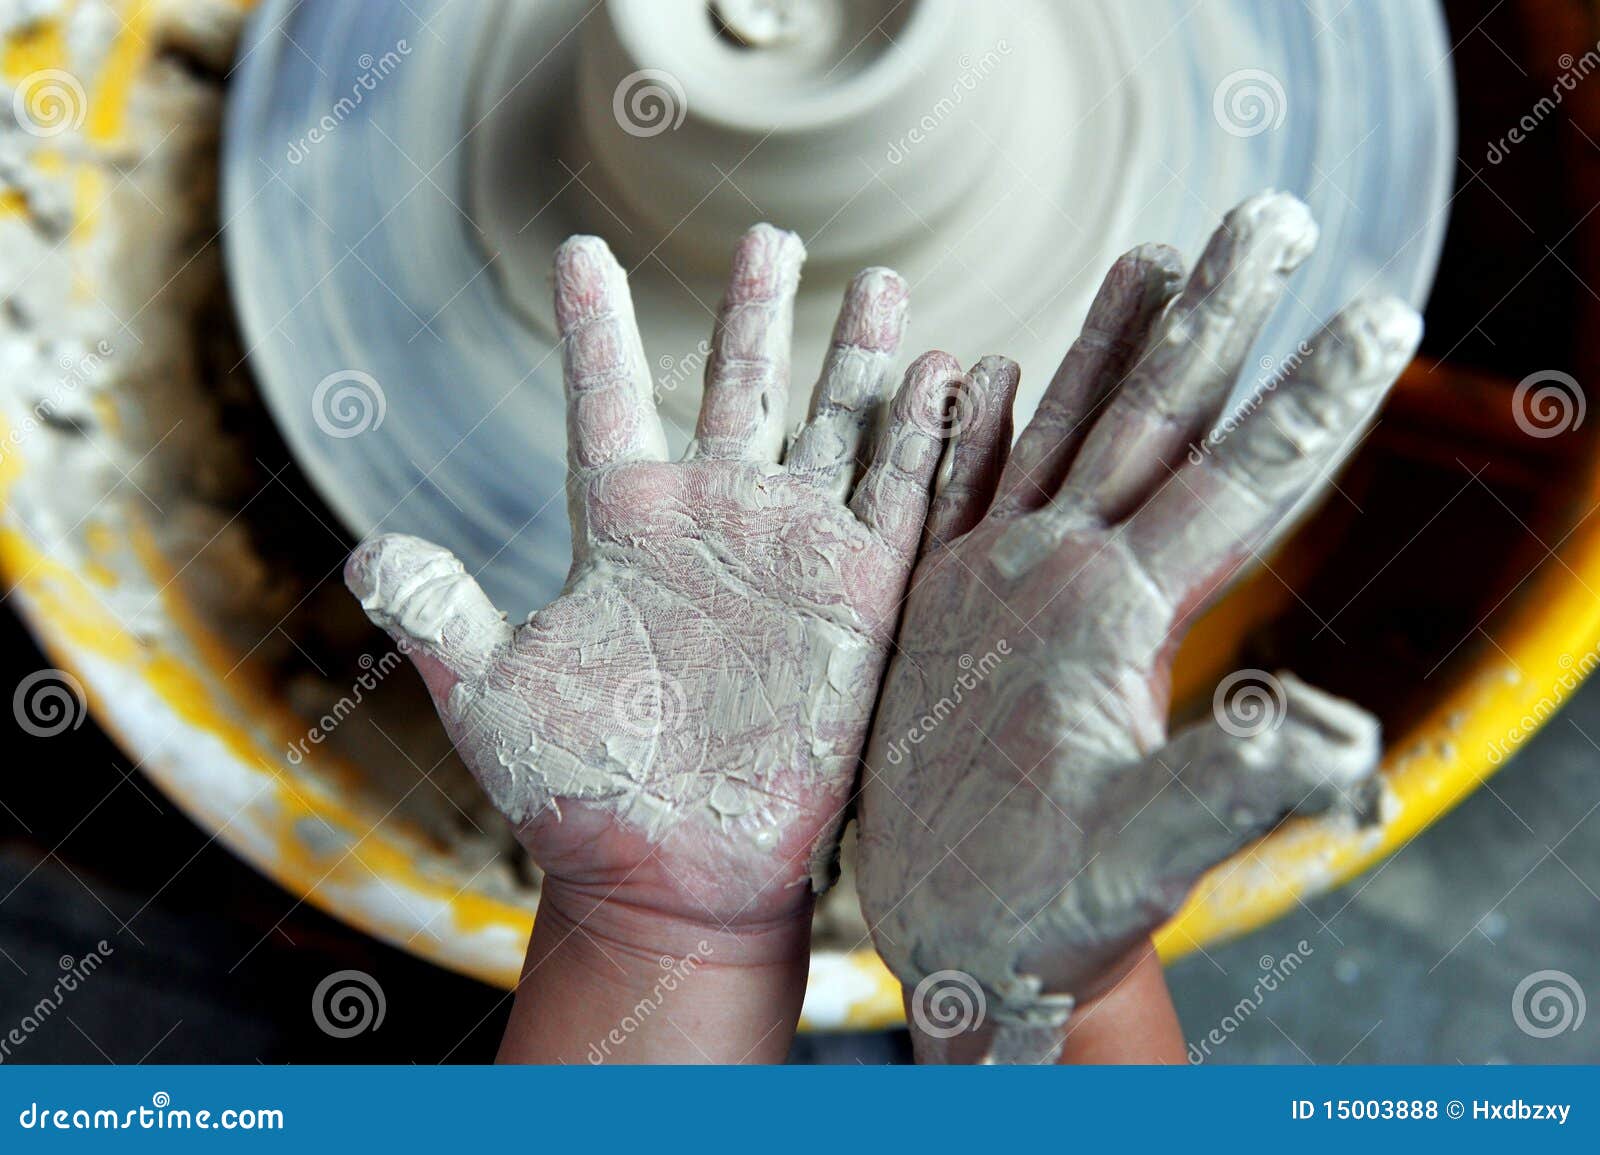 child play with pottery